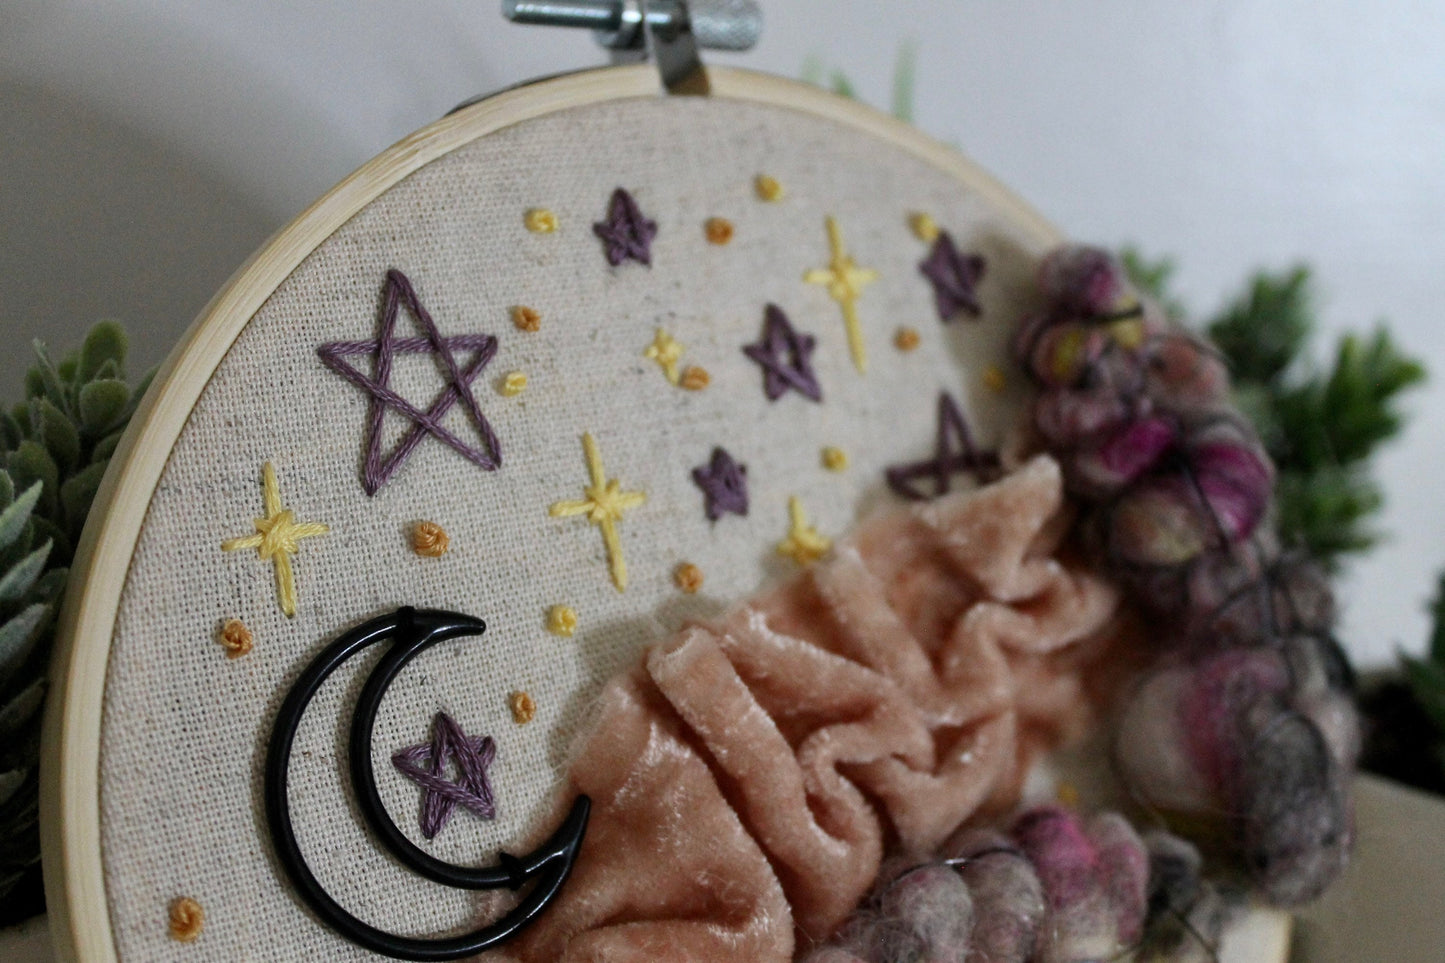 Night sky embroidery | abstract | star | embroidery hoop | foil embroidery | diy | gift idea | flower